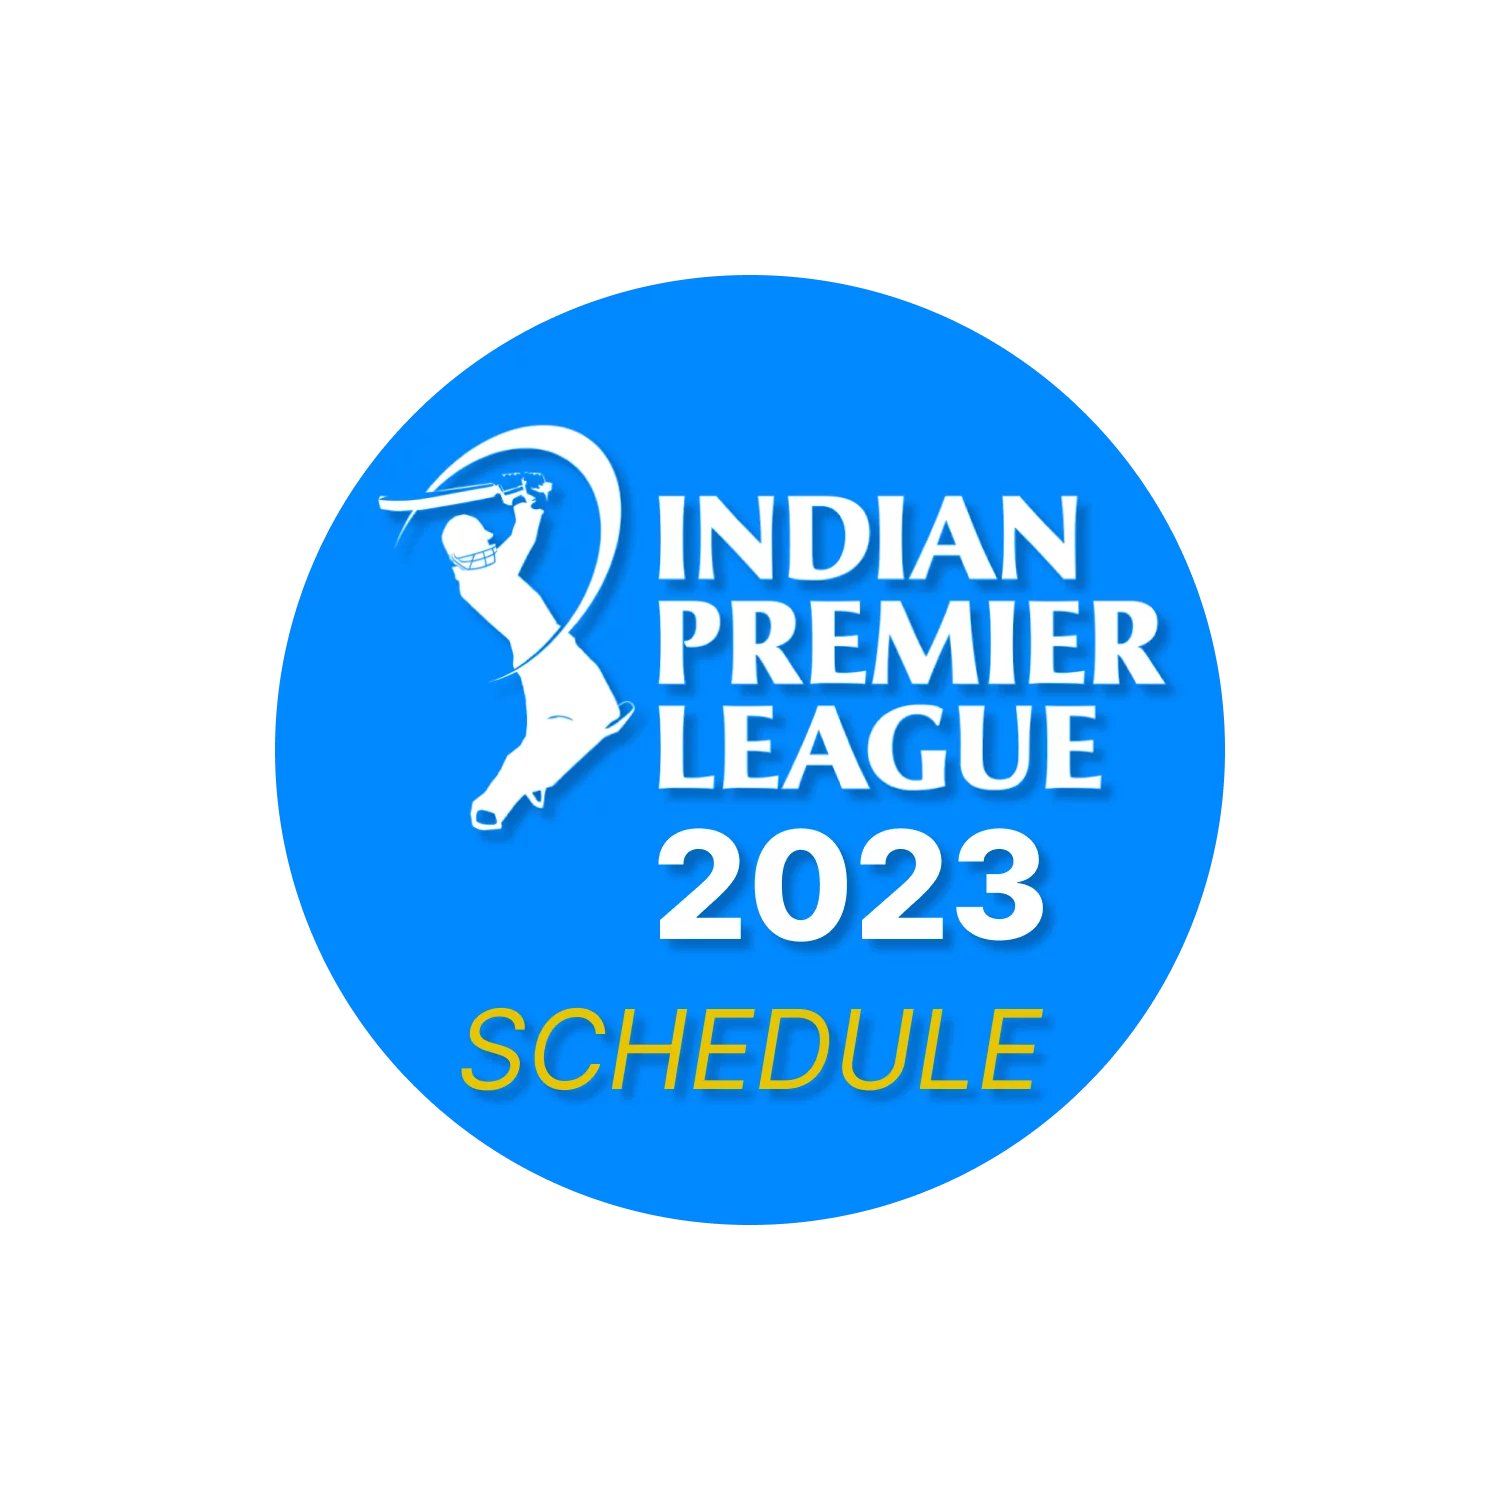 Find out the schedule of IPL cricket matches.